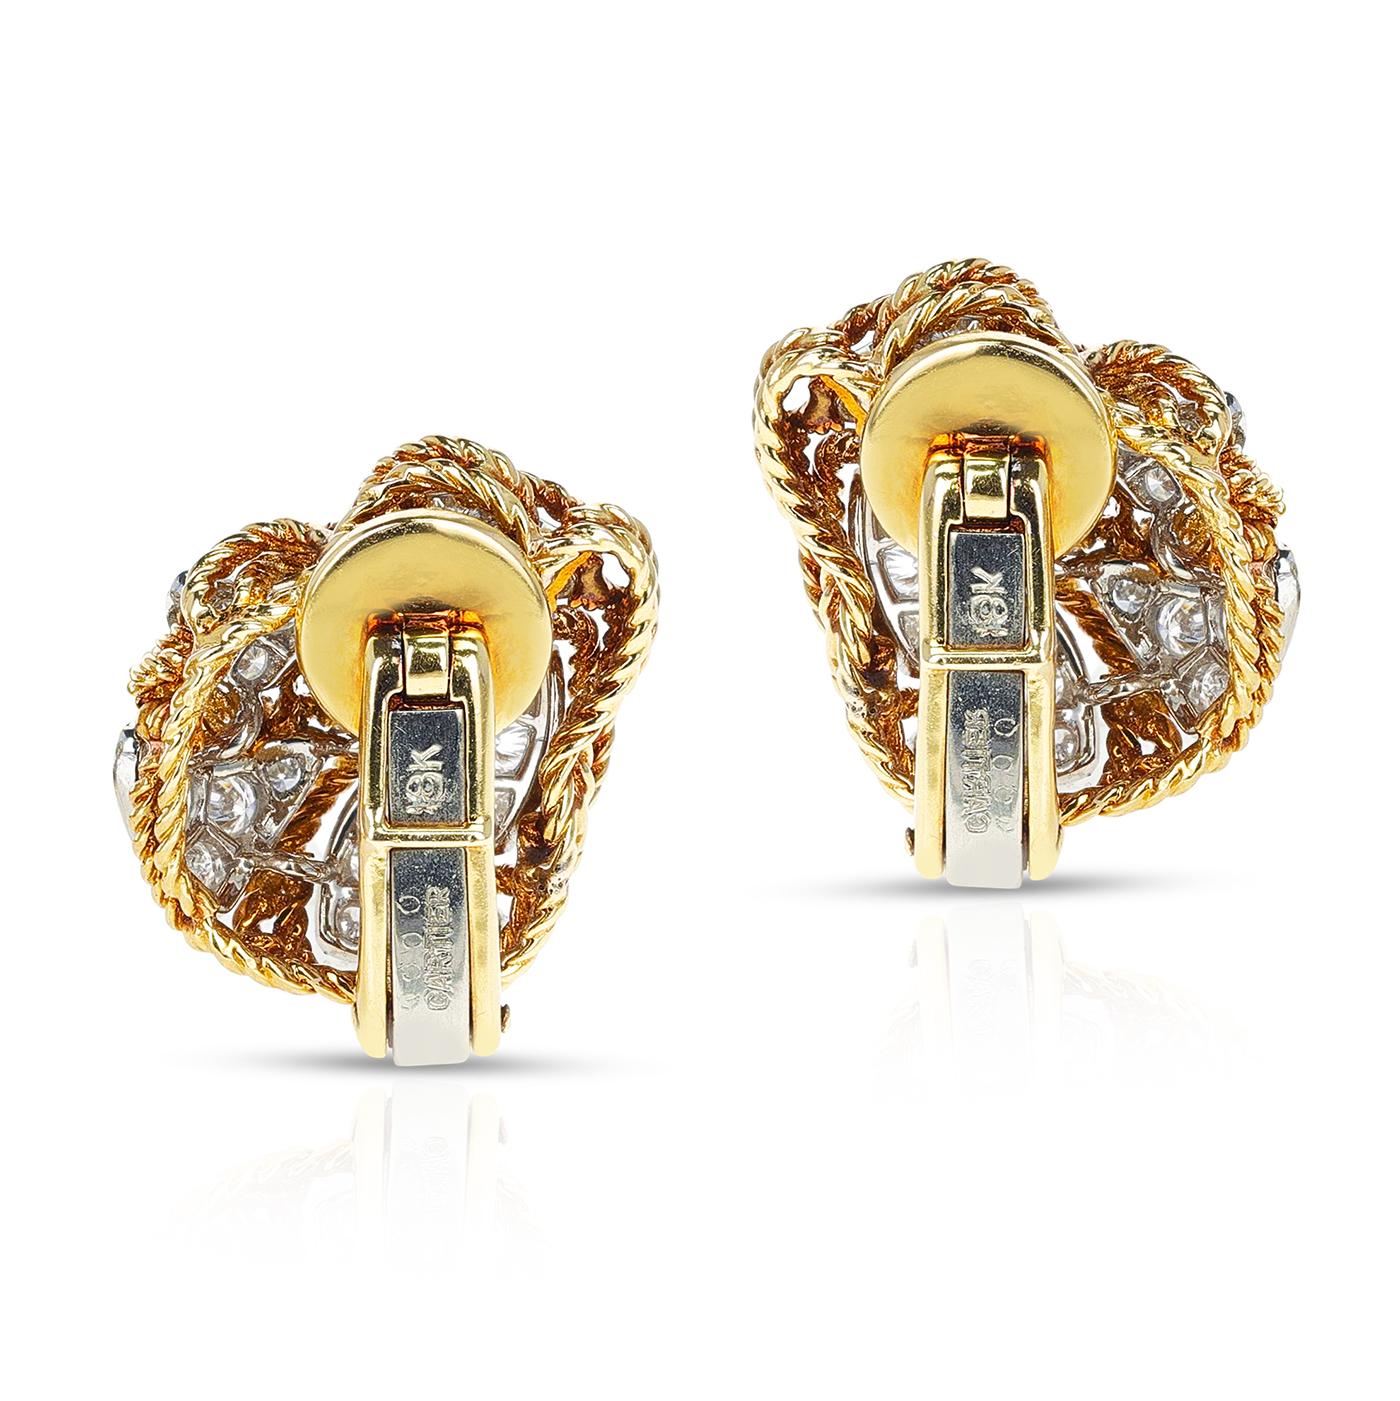 A classic pair of Cartier Diamond Cocktail Earrings made in 18K Yellow Gold made in the 1960's. The diamonds weigh appx. 3.25 carats. The total weight of the earring is 20.53 grams. The length of the earring is 0.88 inches and the width is 0.78